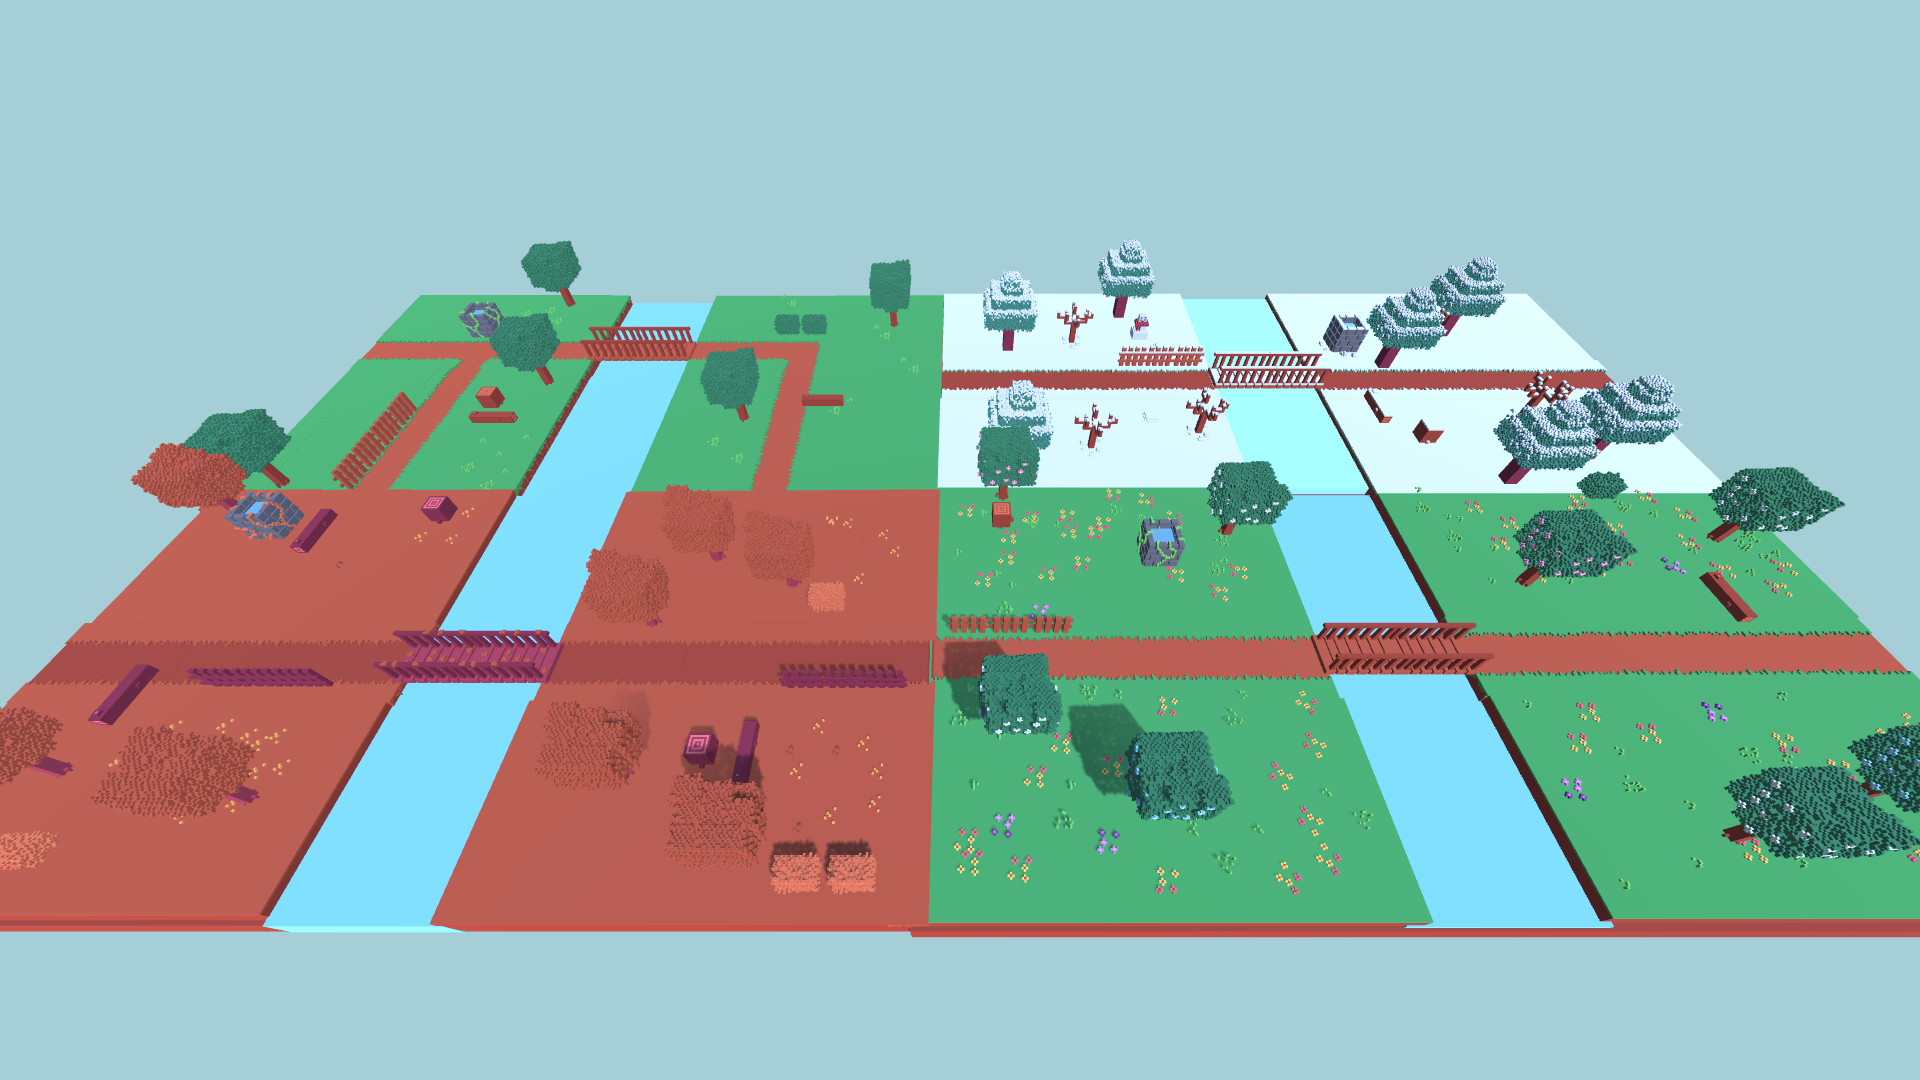 voxel game assets the four season forest